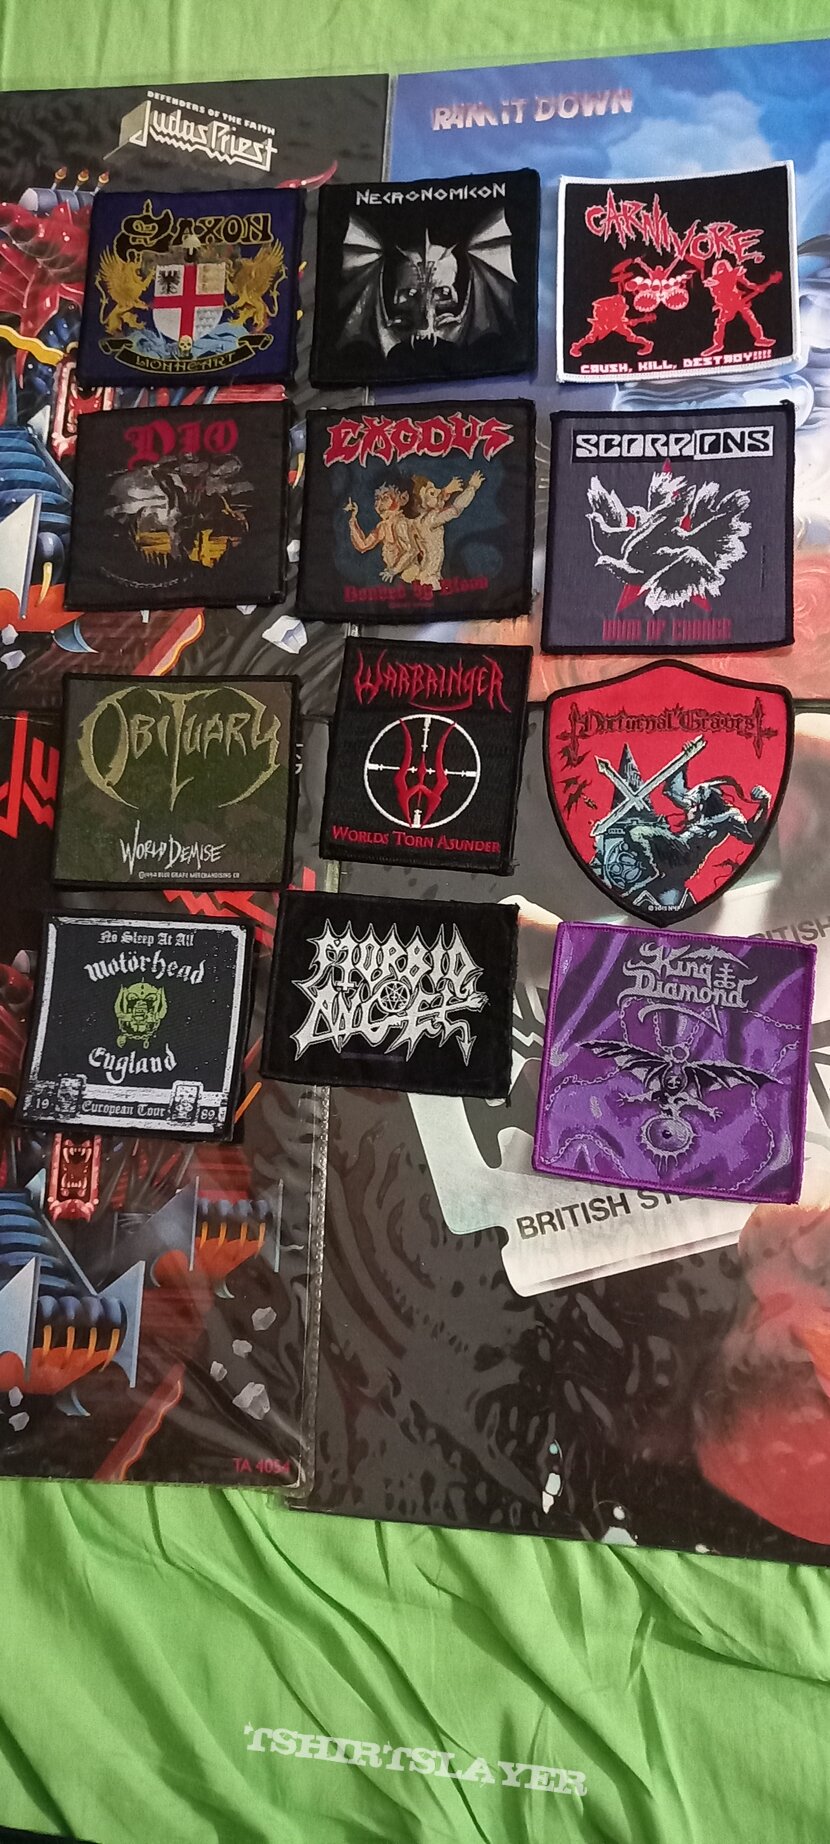 W.A.S.P. Some patches